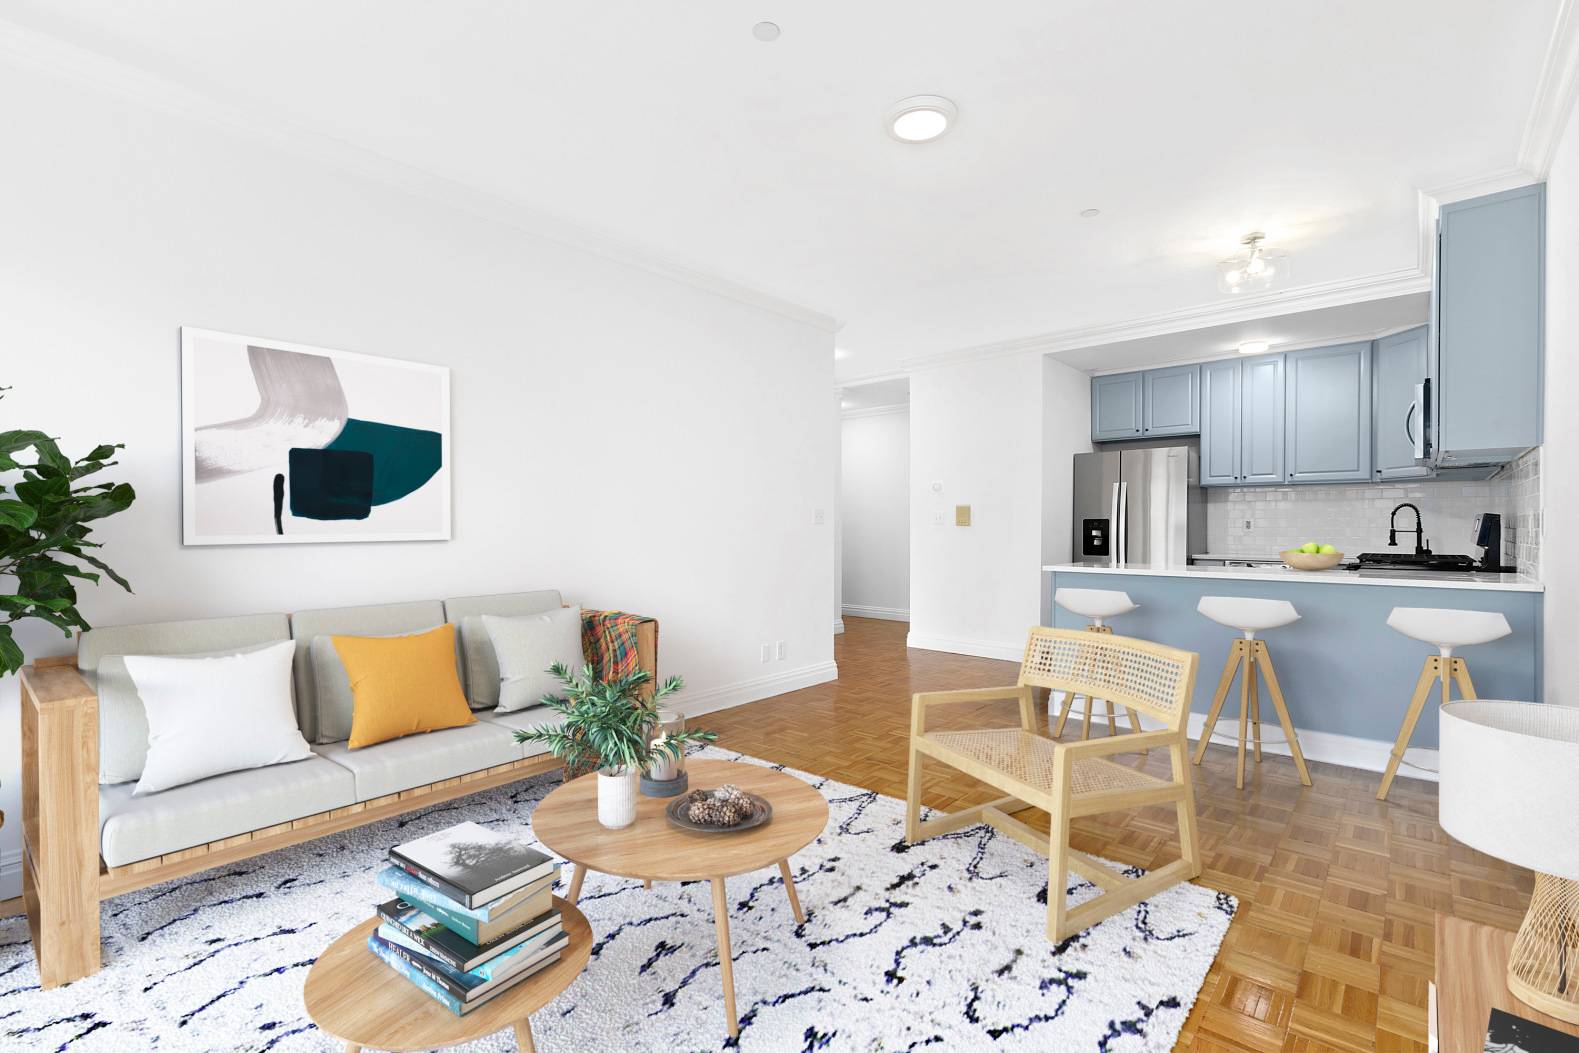 Exciting opportunity to own a charming and oversized 720 square foot one bedroom in a boutique condominium in prime Williamsburg It s the perfect home you have been waiting for.